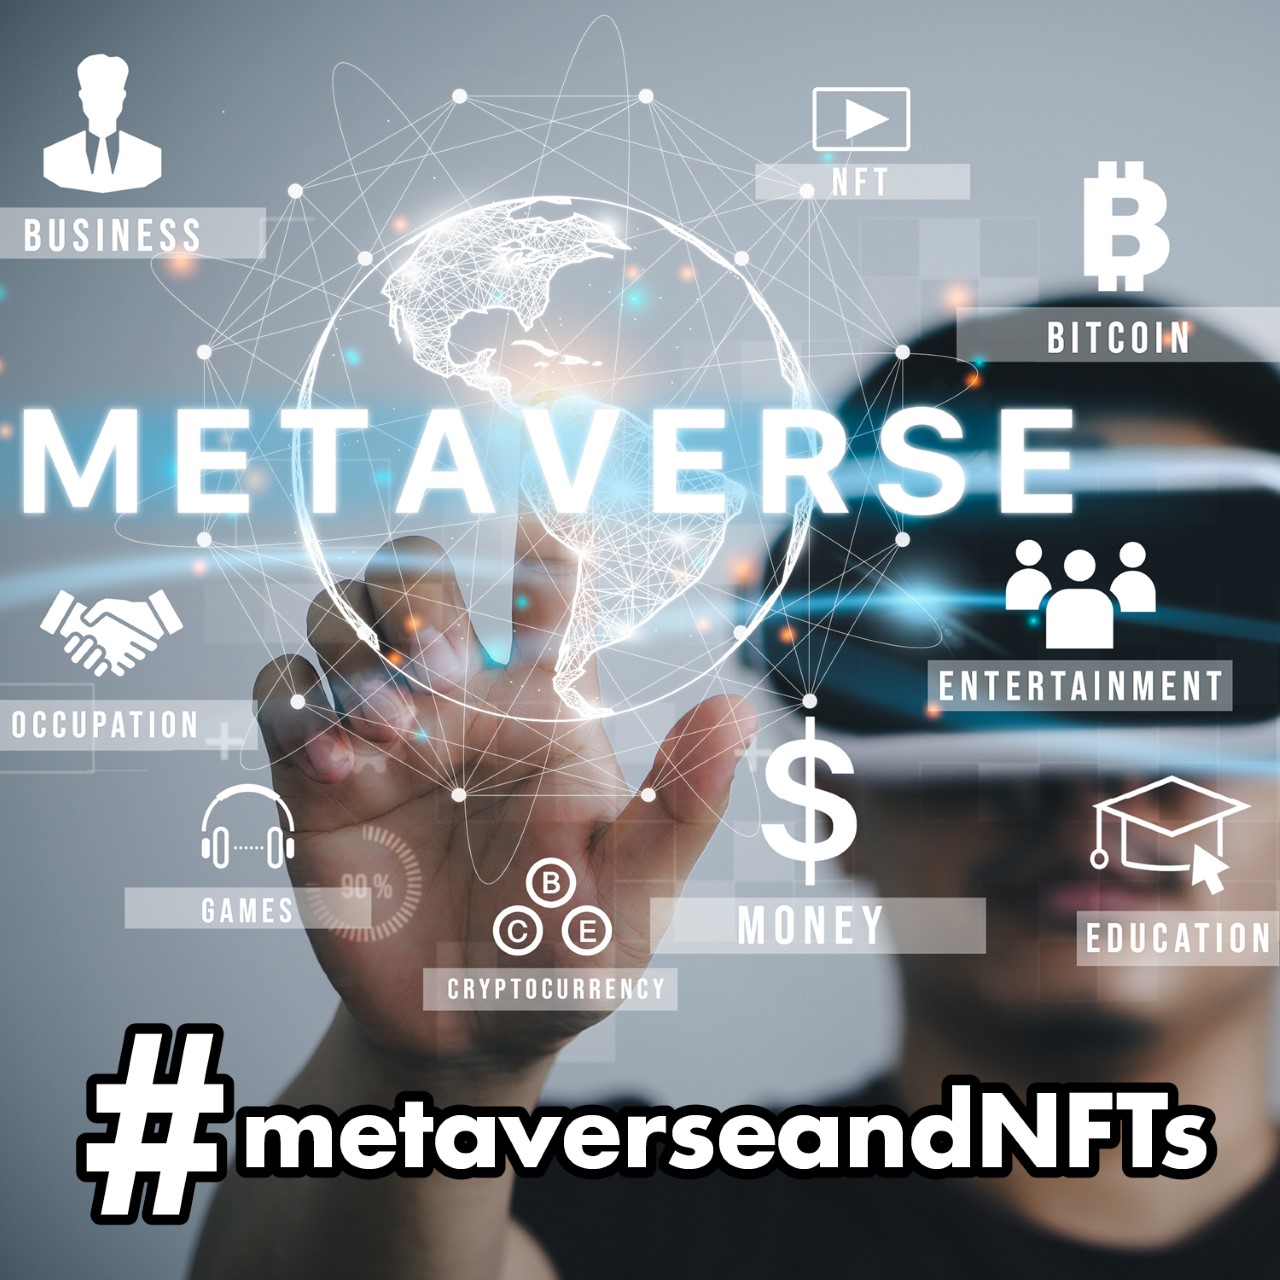 person tapping the word "metaverse" including icons for business, NFT, Bitcoin, entertainment, money, education, cryptocurrency, games, occupation, and business.